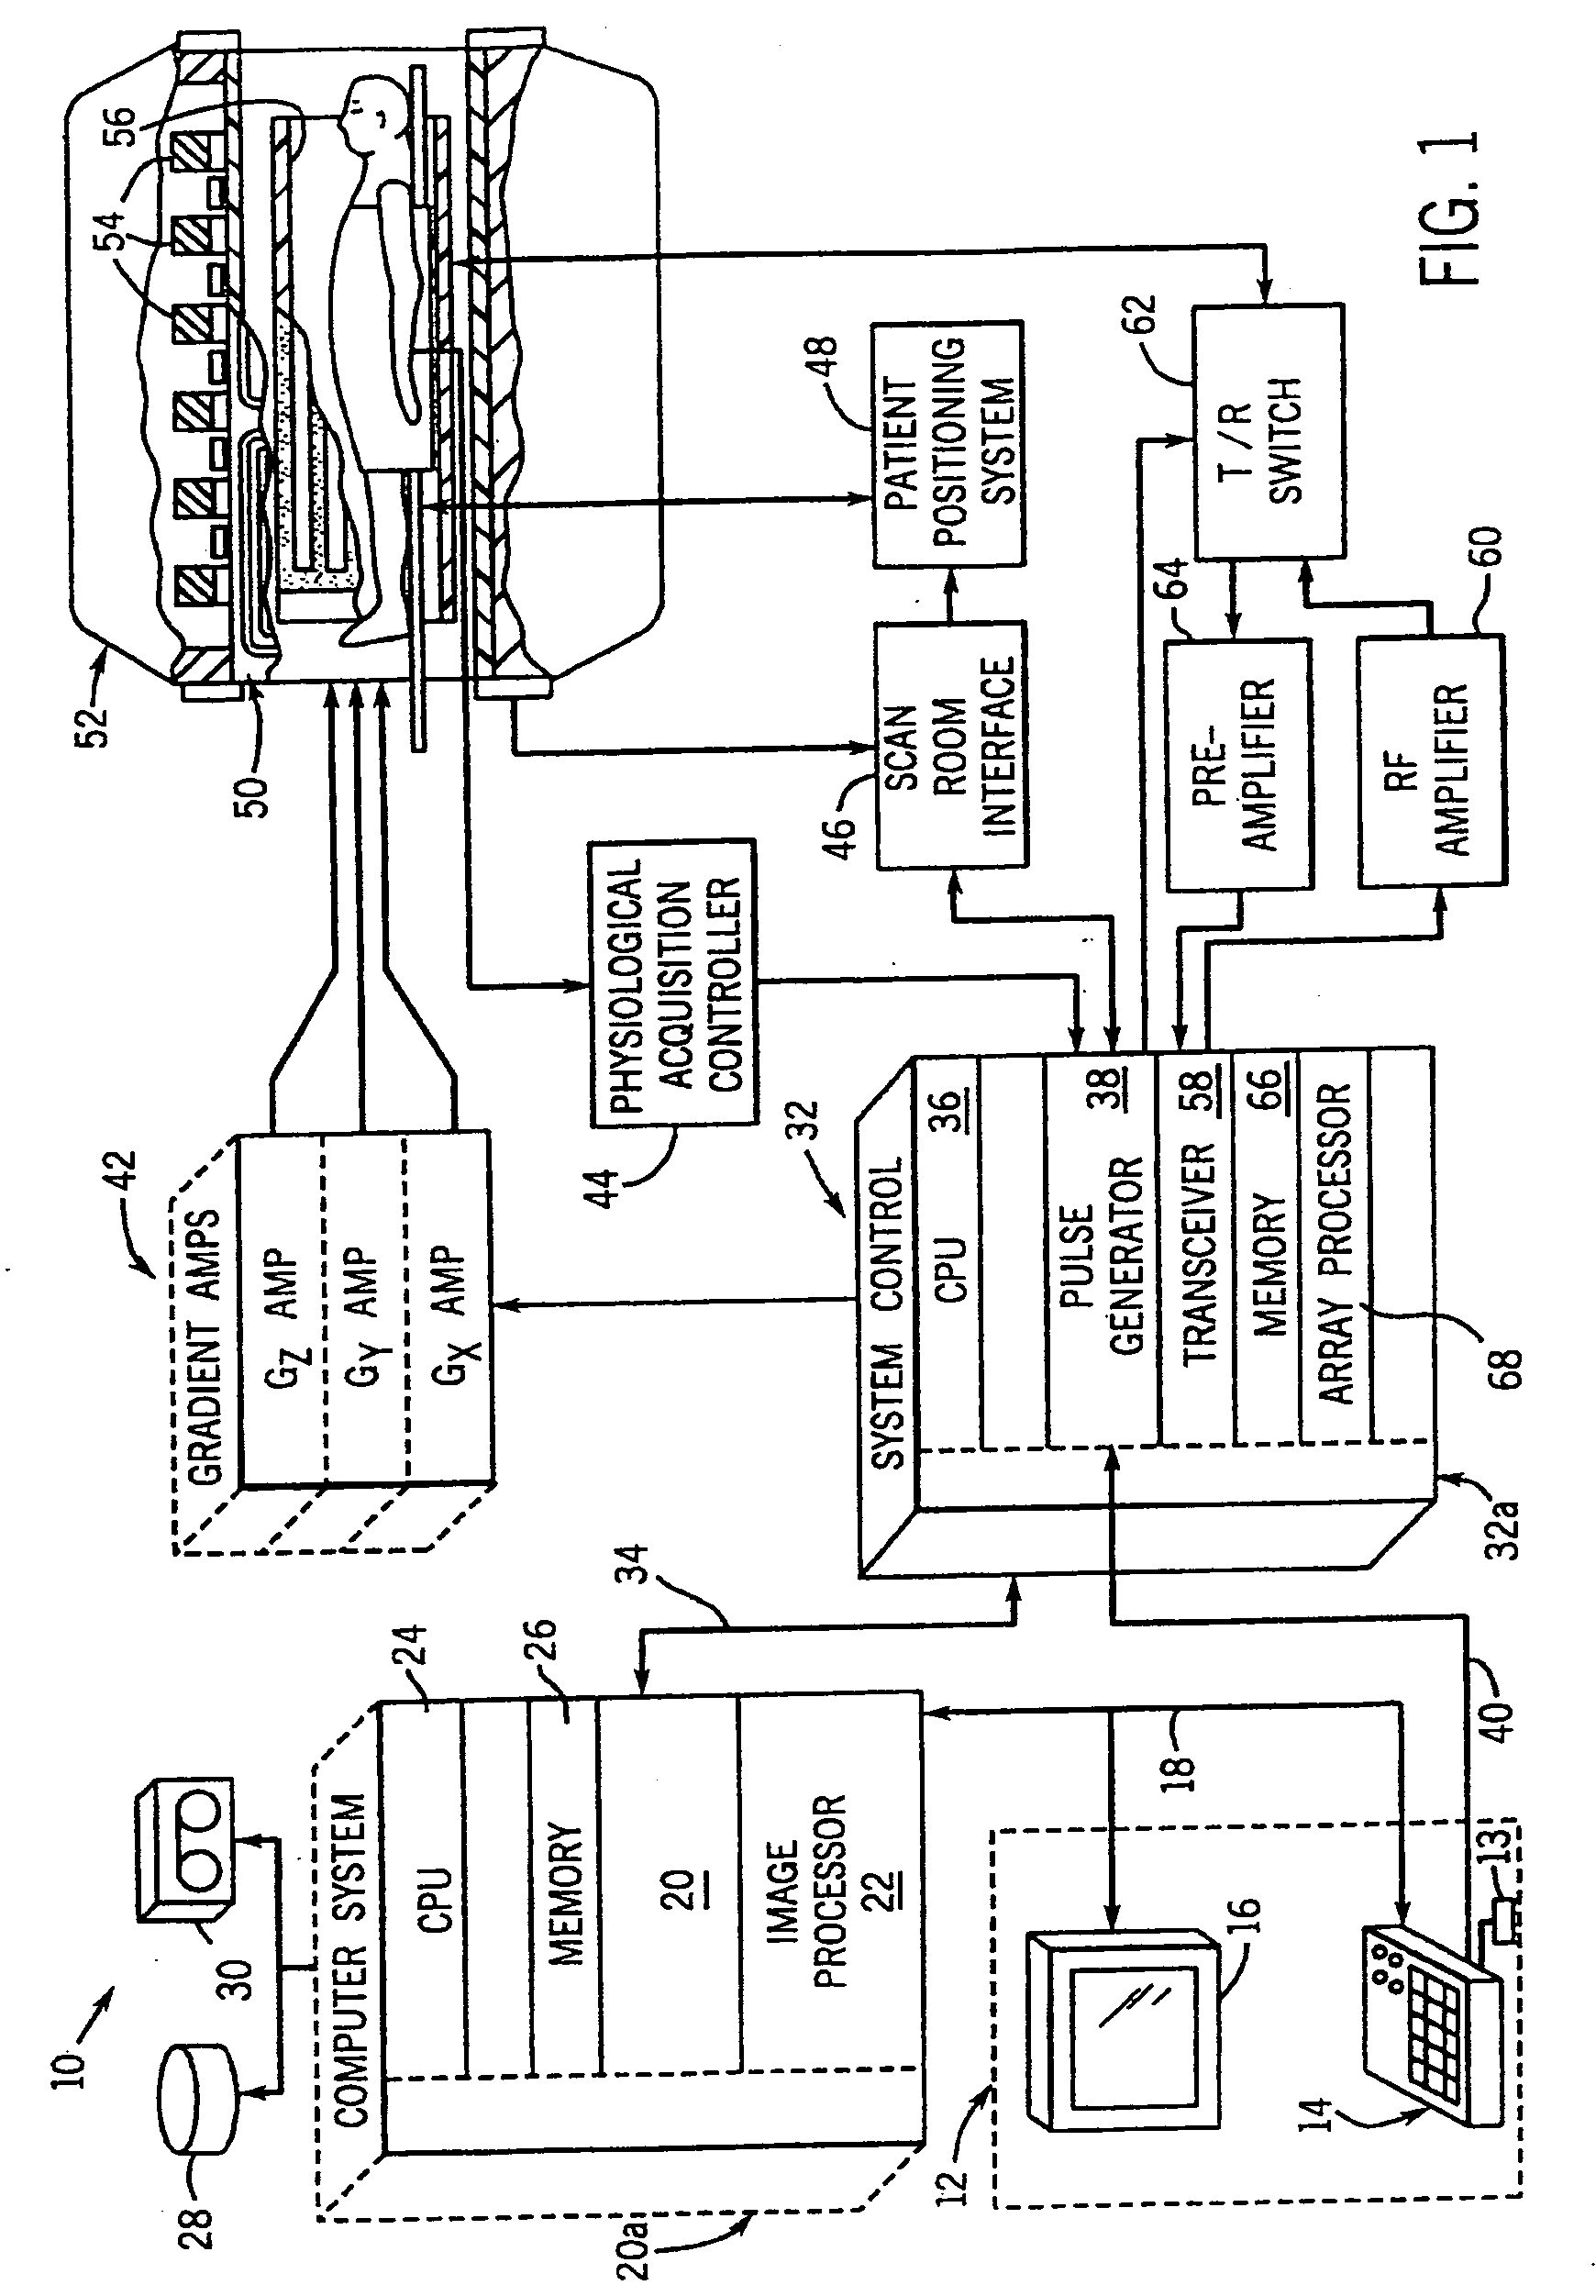 Method and apparatus to reduce RF power deposition during MR data acquisition